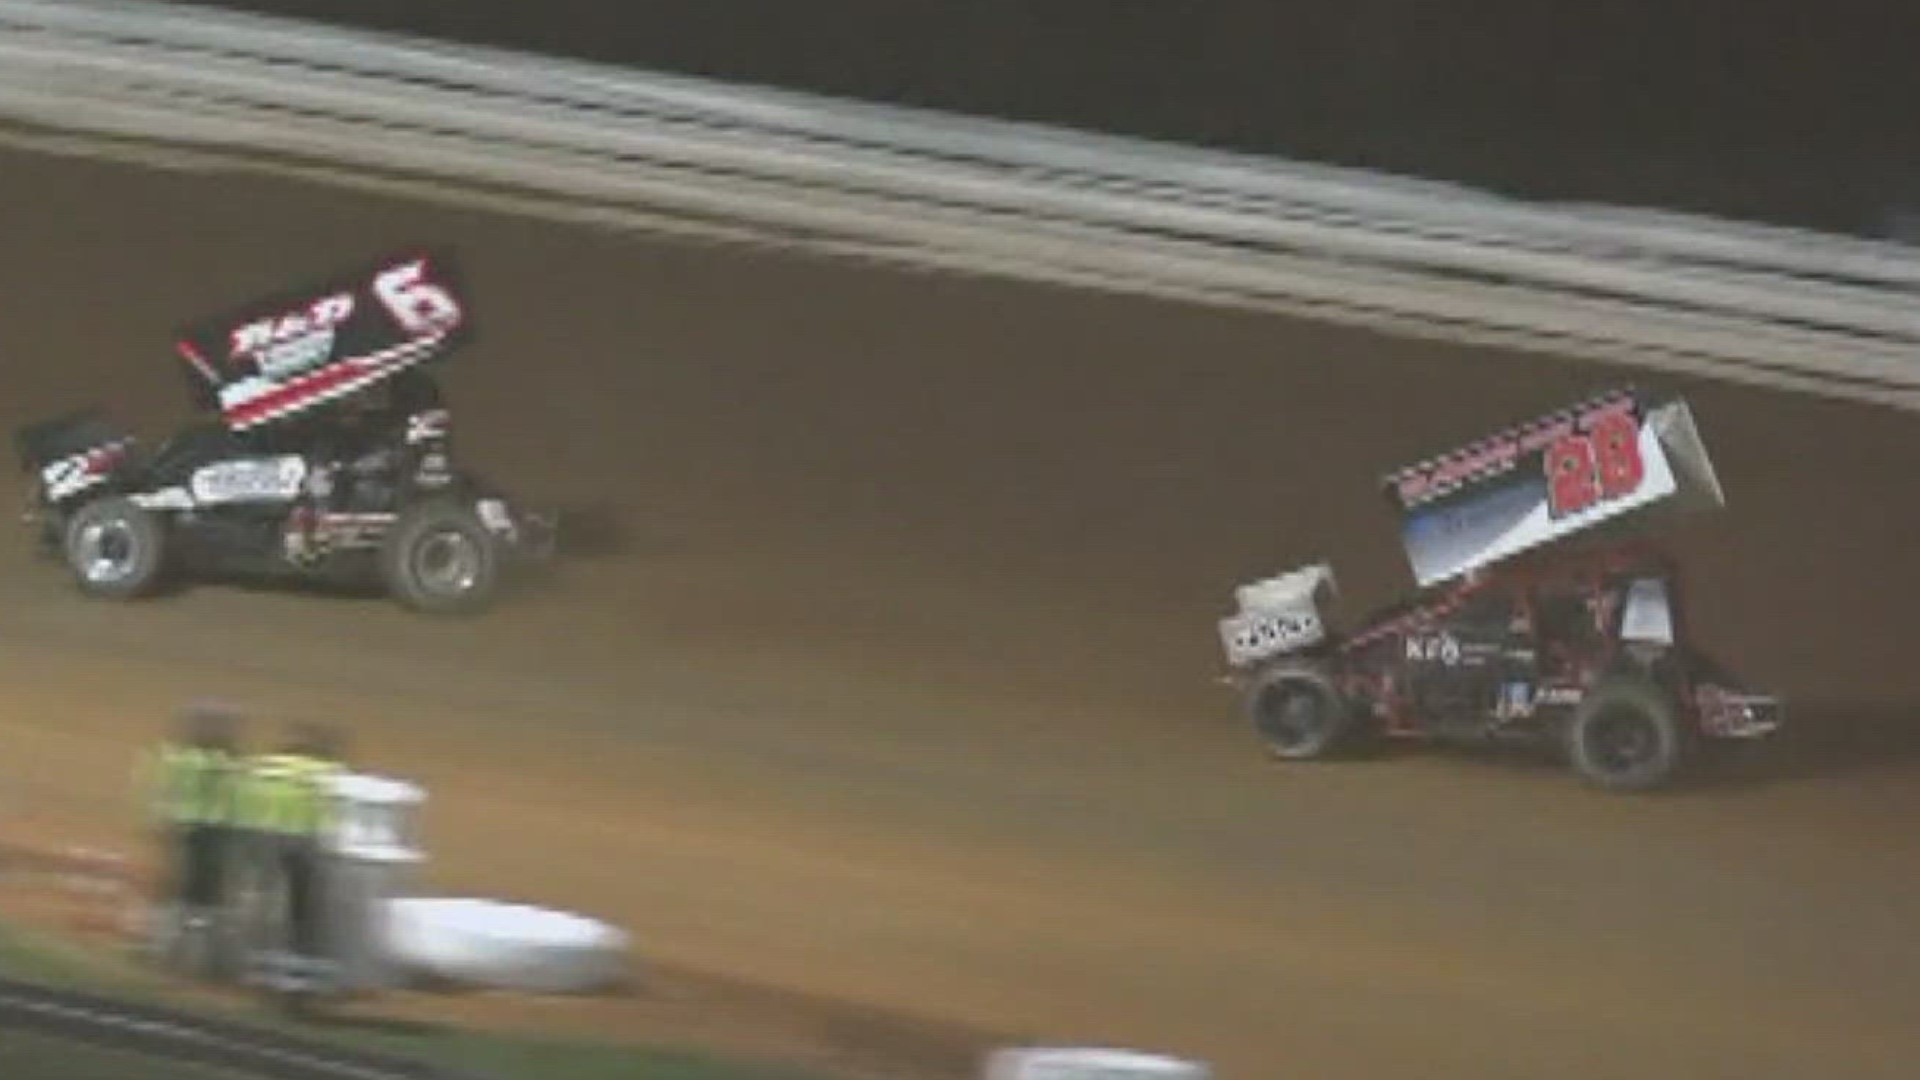 On a cold night in late March, the 410 feature at Williams Grove heated up on the final lap.